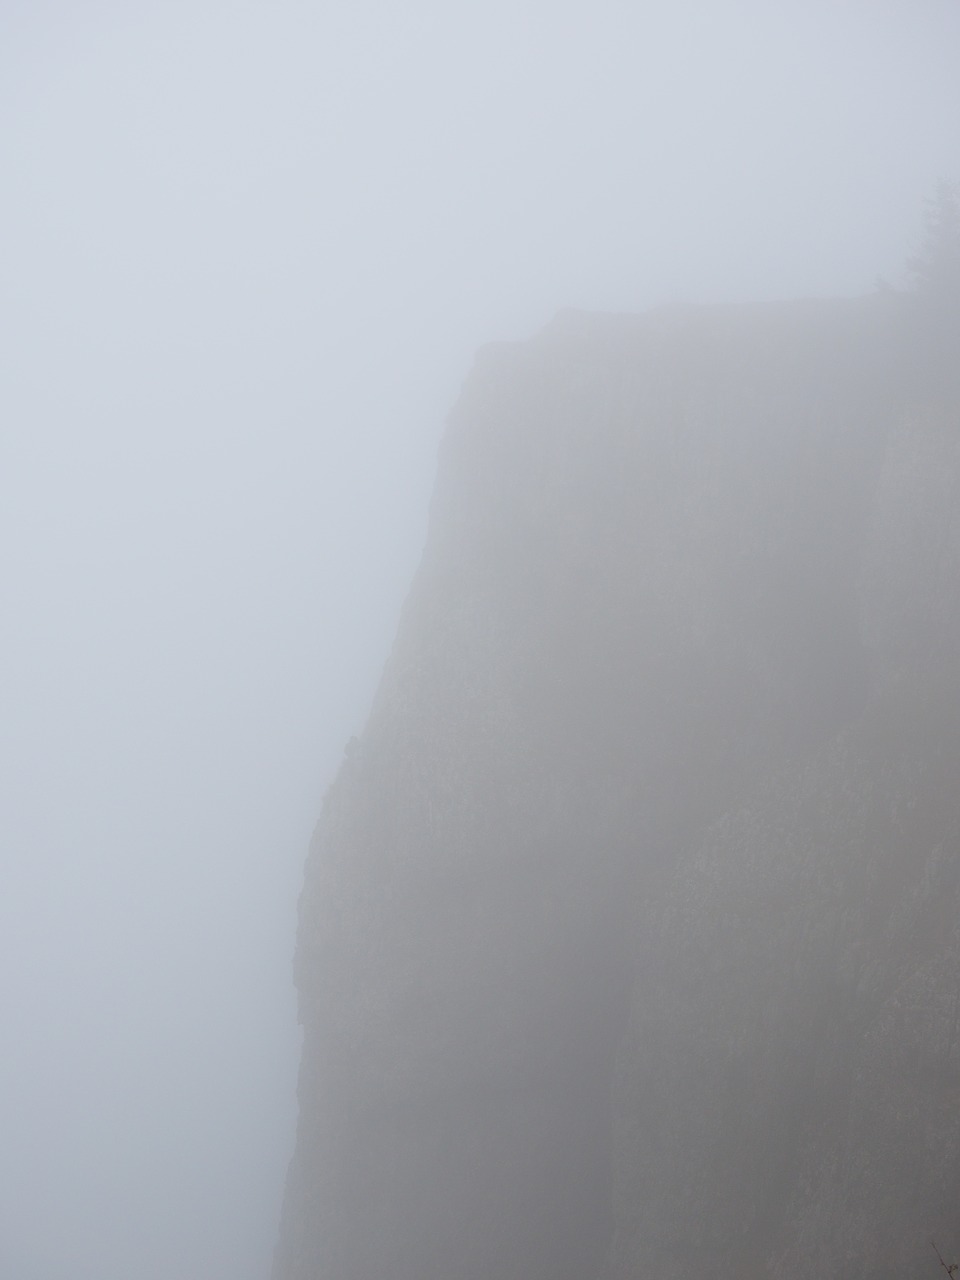 rock fog abyss free photo